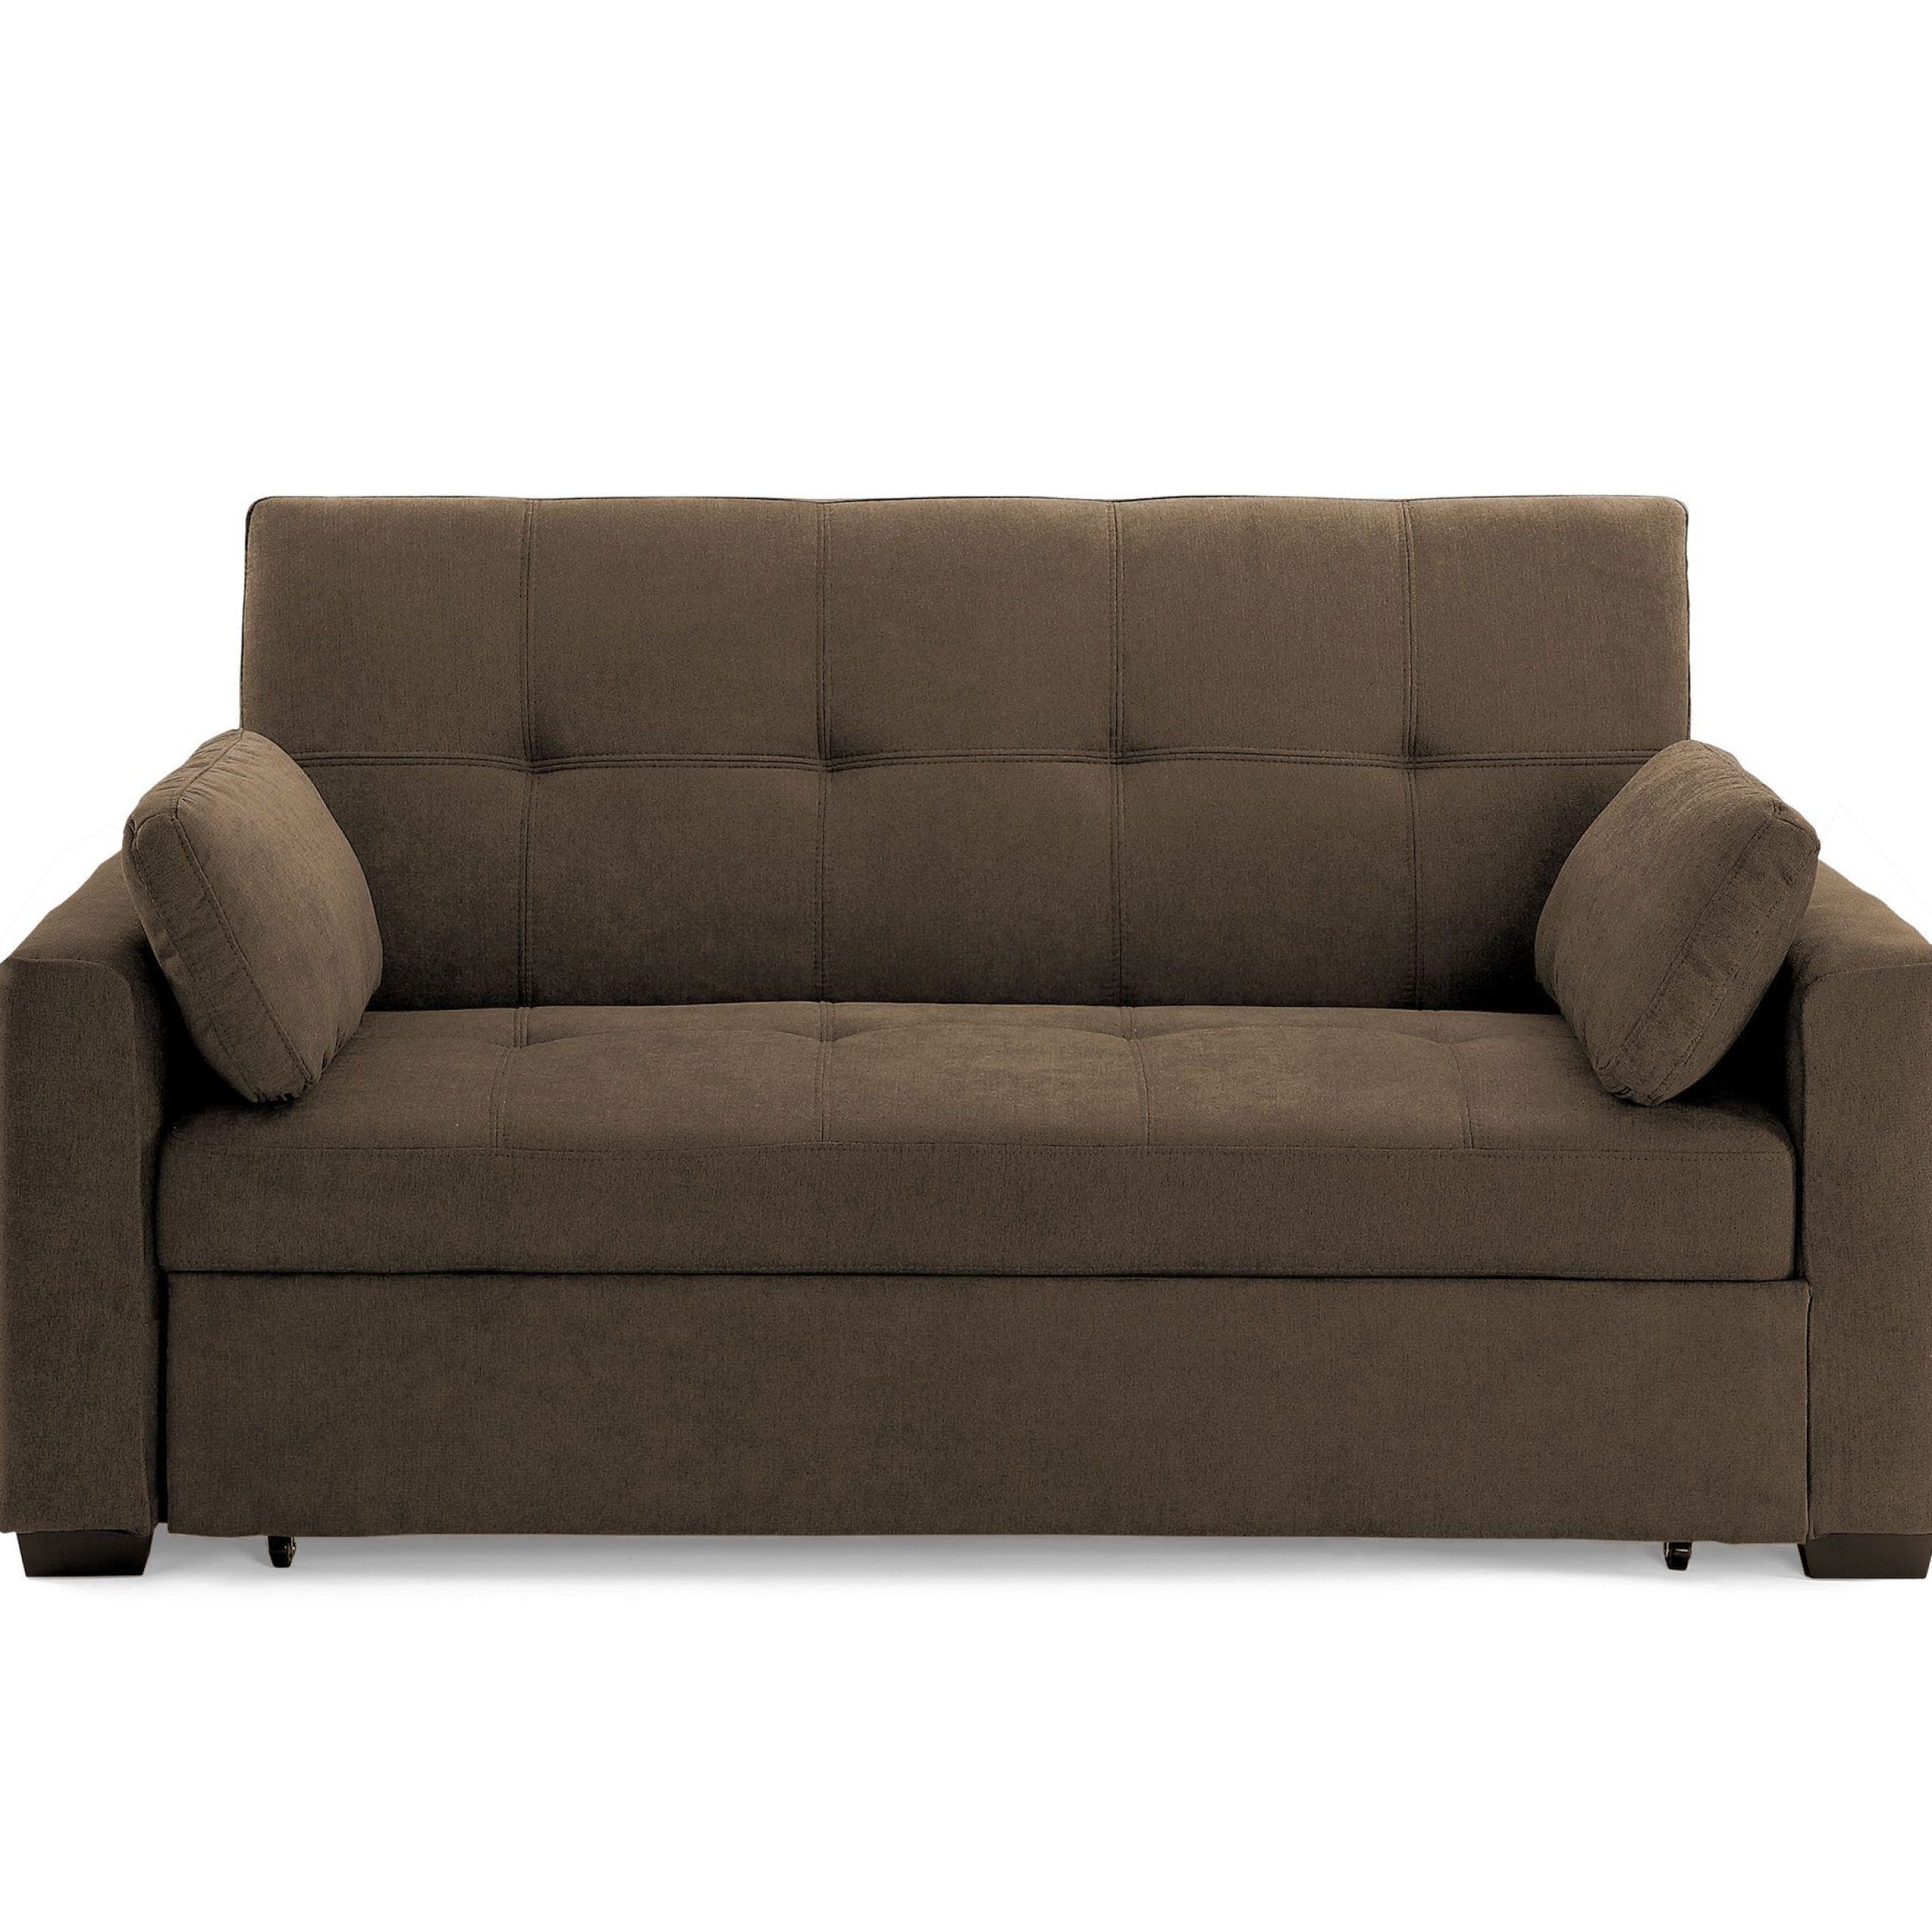 Queen Size Convertible Sofa Bed | Edtnaerca With Queen Size Convertible Sofa Beds (Gallery 17 of 20)